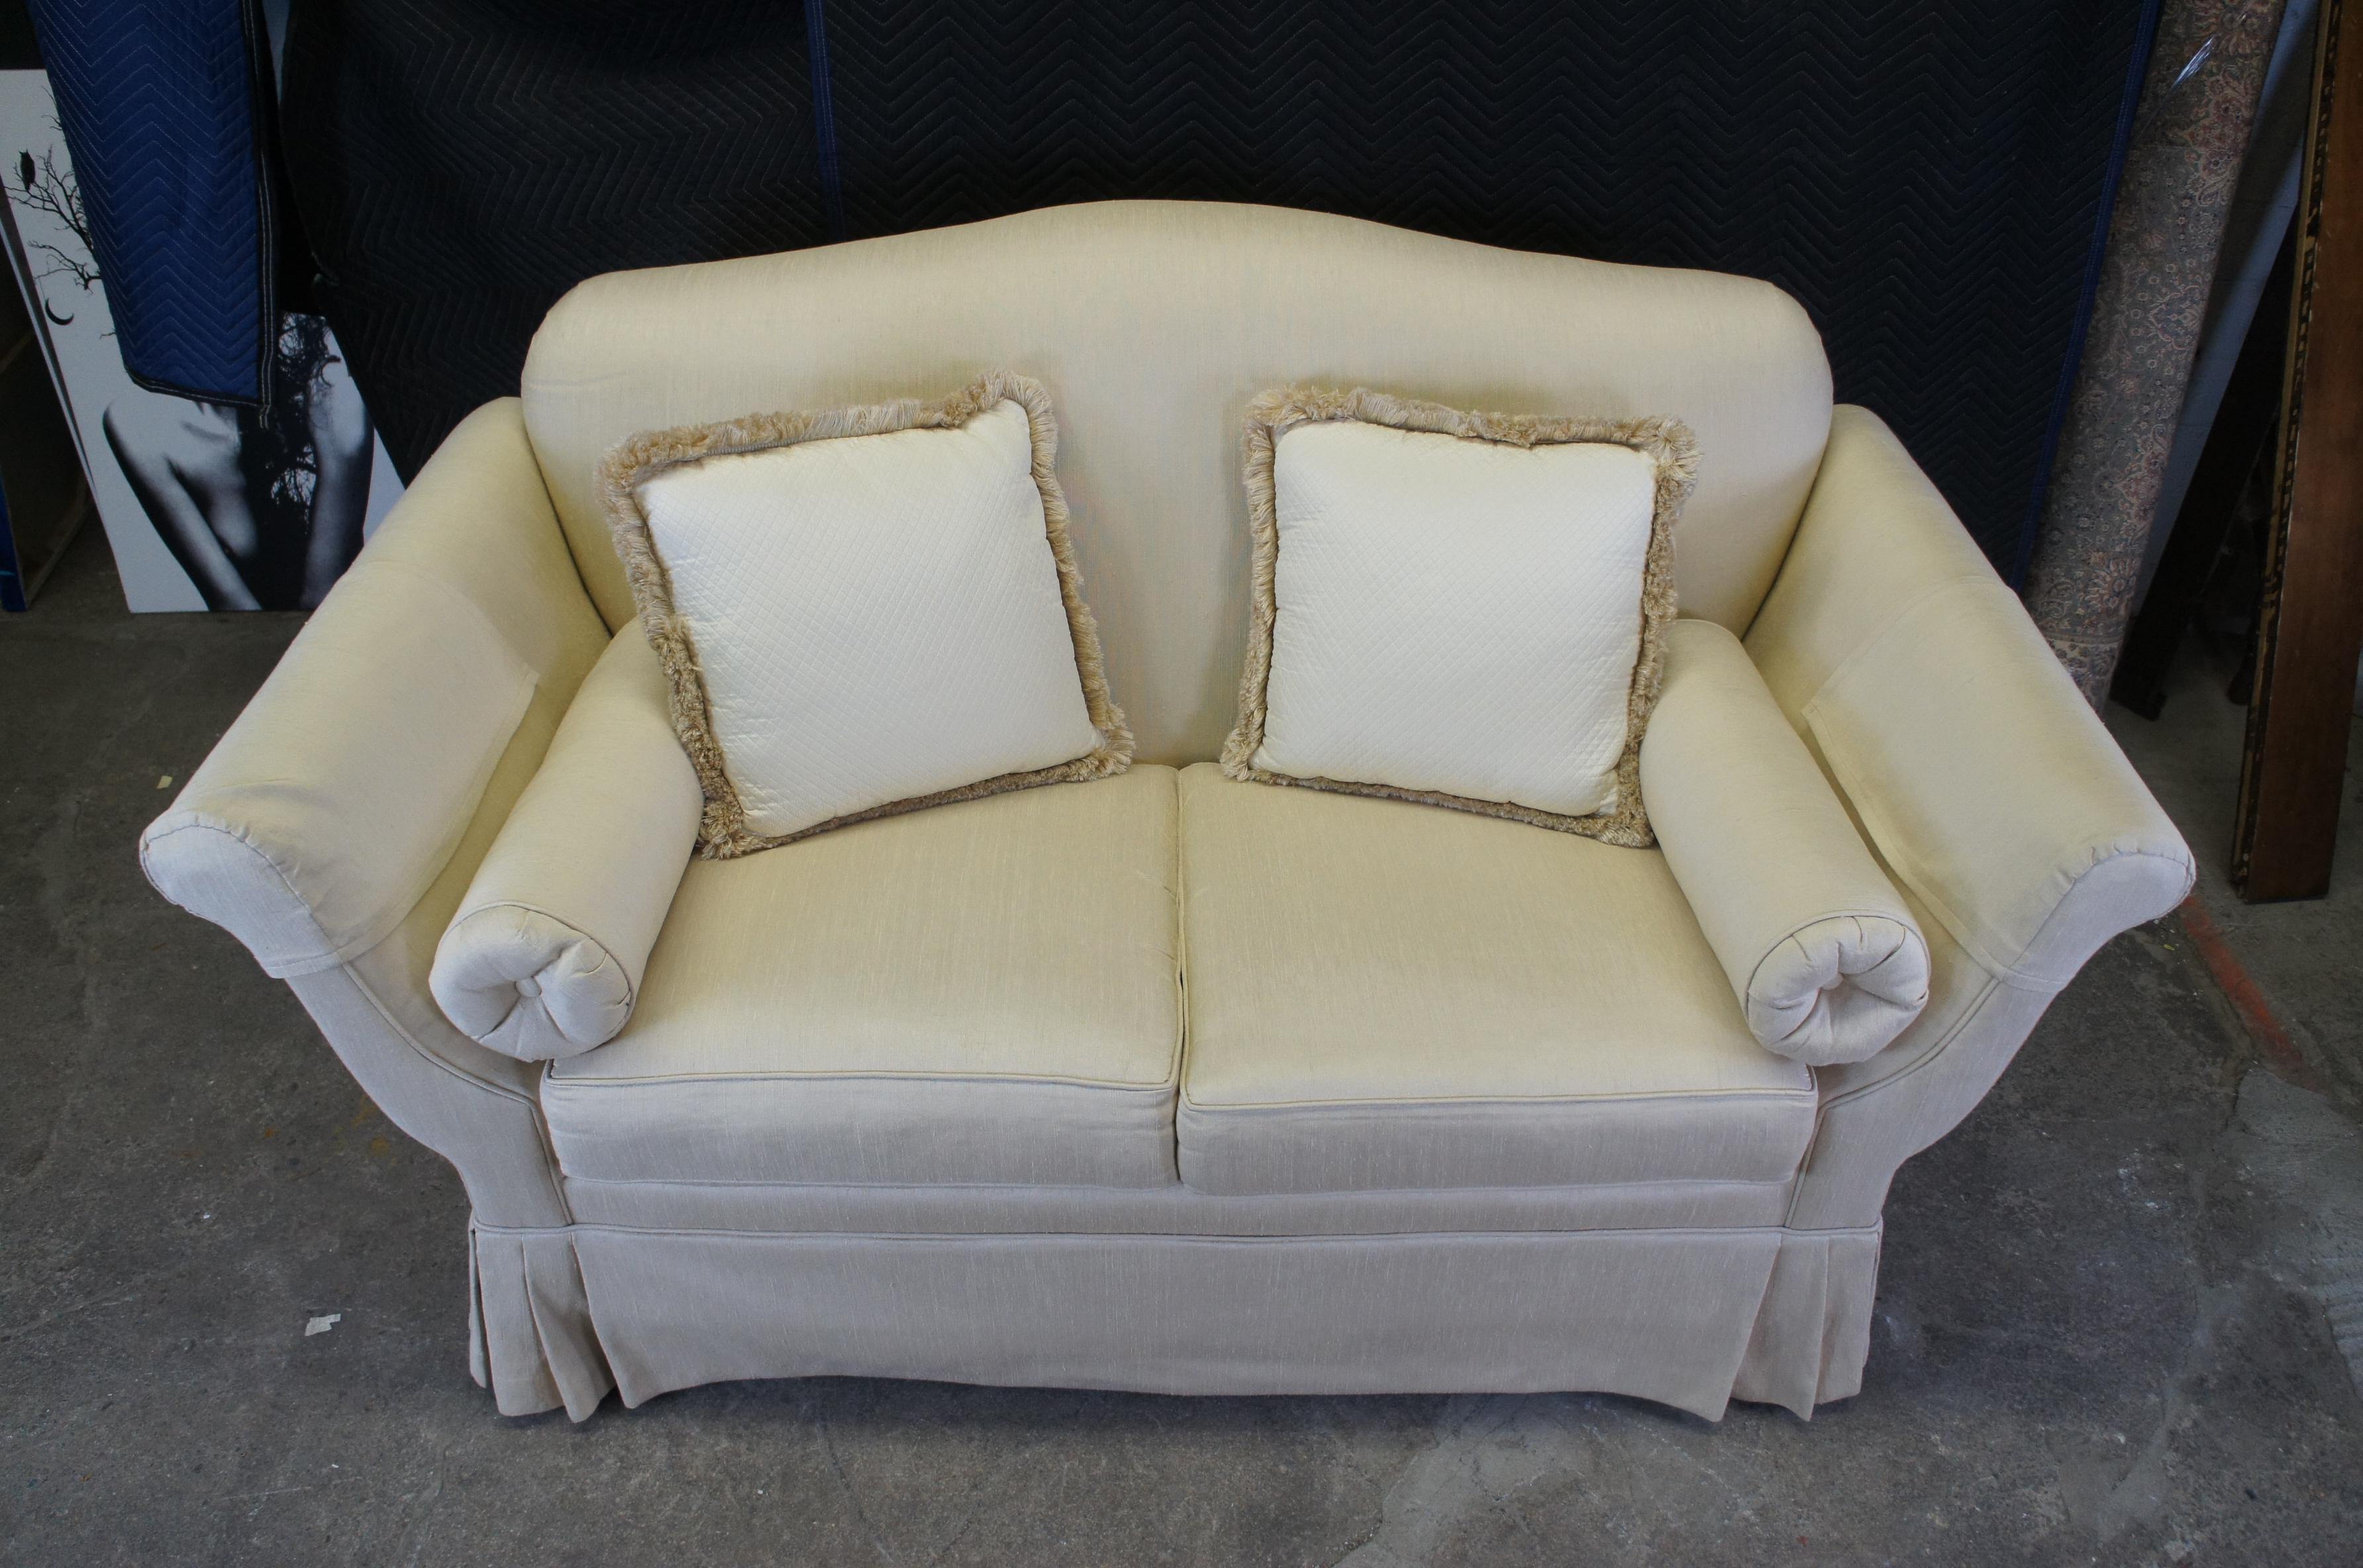 Vintage French Knole Style Silk Down Filled High Arm Loveseat Settee Sofa Couch In Good Condition For Sale In Dayton, OH